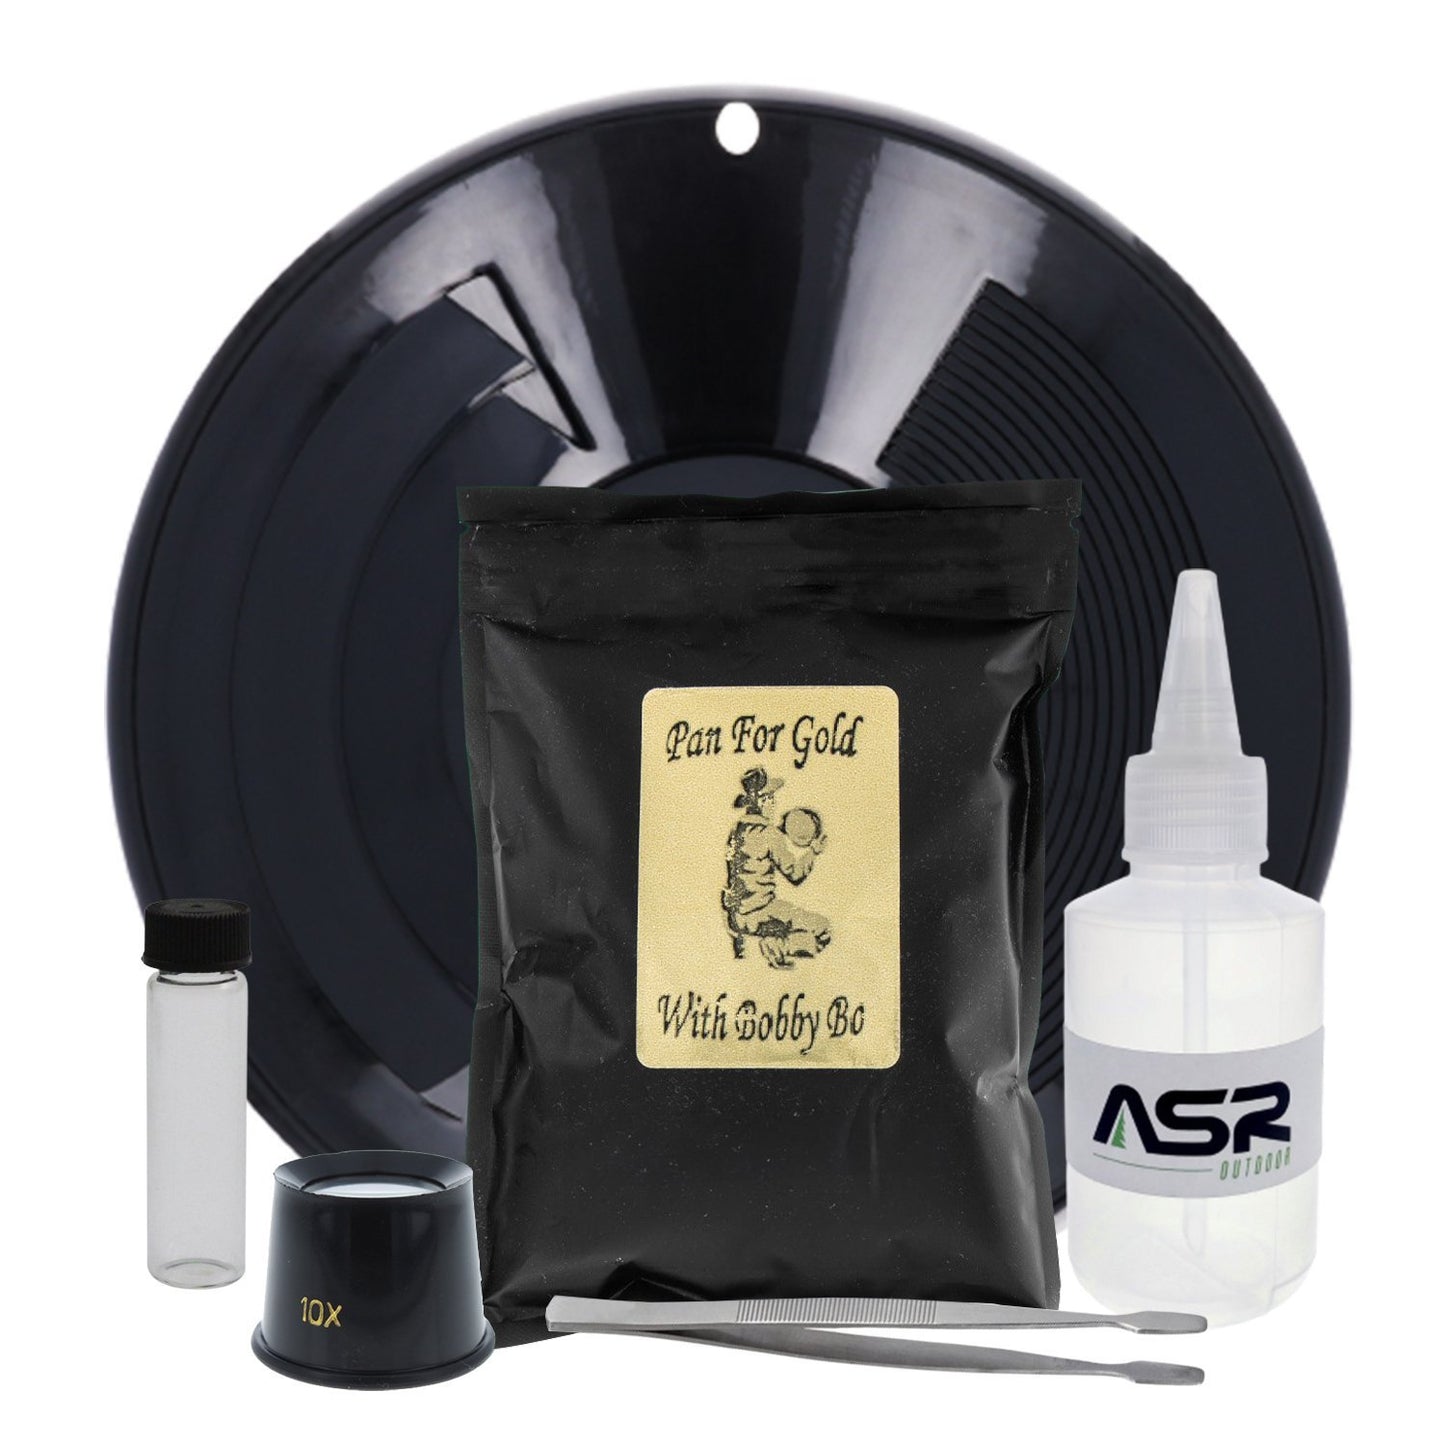 ASR Outdoor X Pan for Gold with Bobby Bo 1lbs Classified Paydirt Gold Panning Kit (3 Colors), 6pc